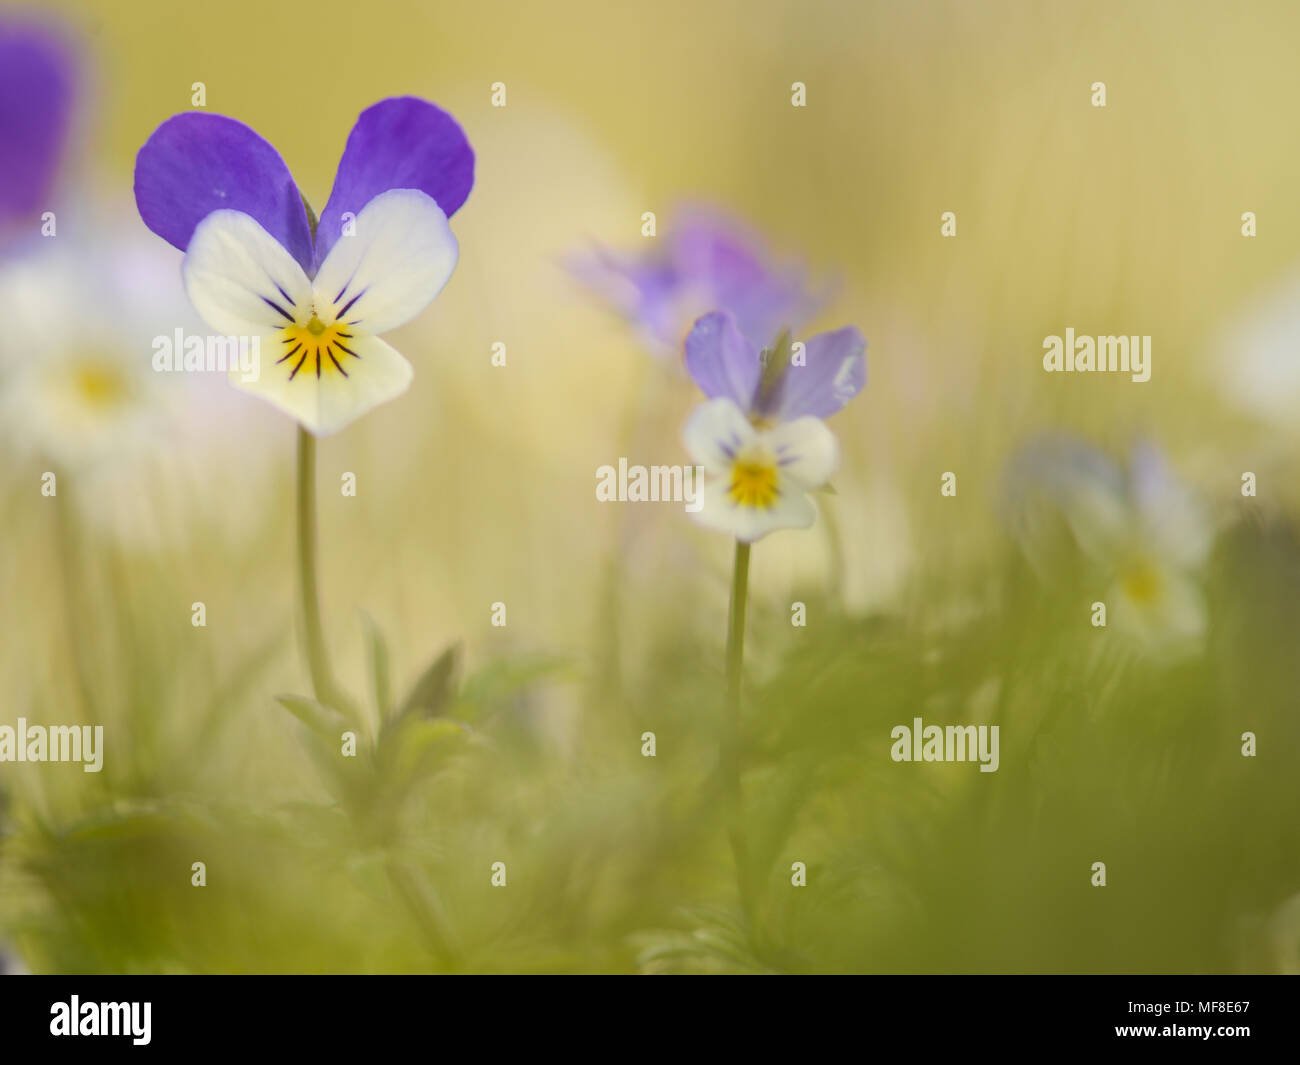 Blooming purple and white violets in the field Stock Photo